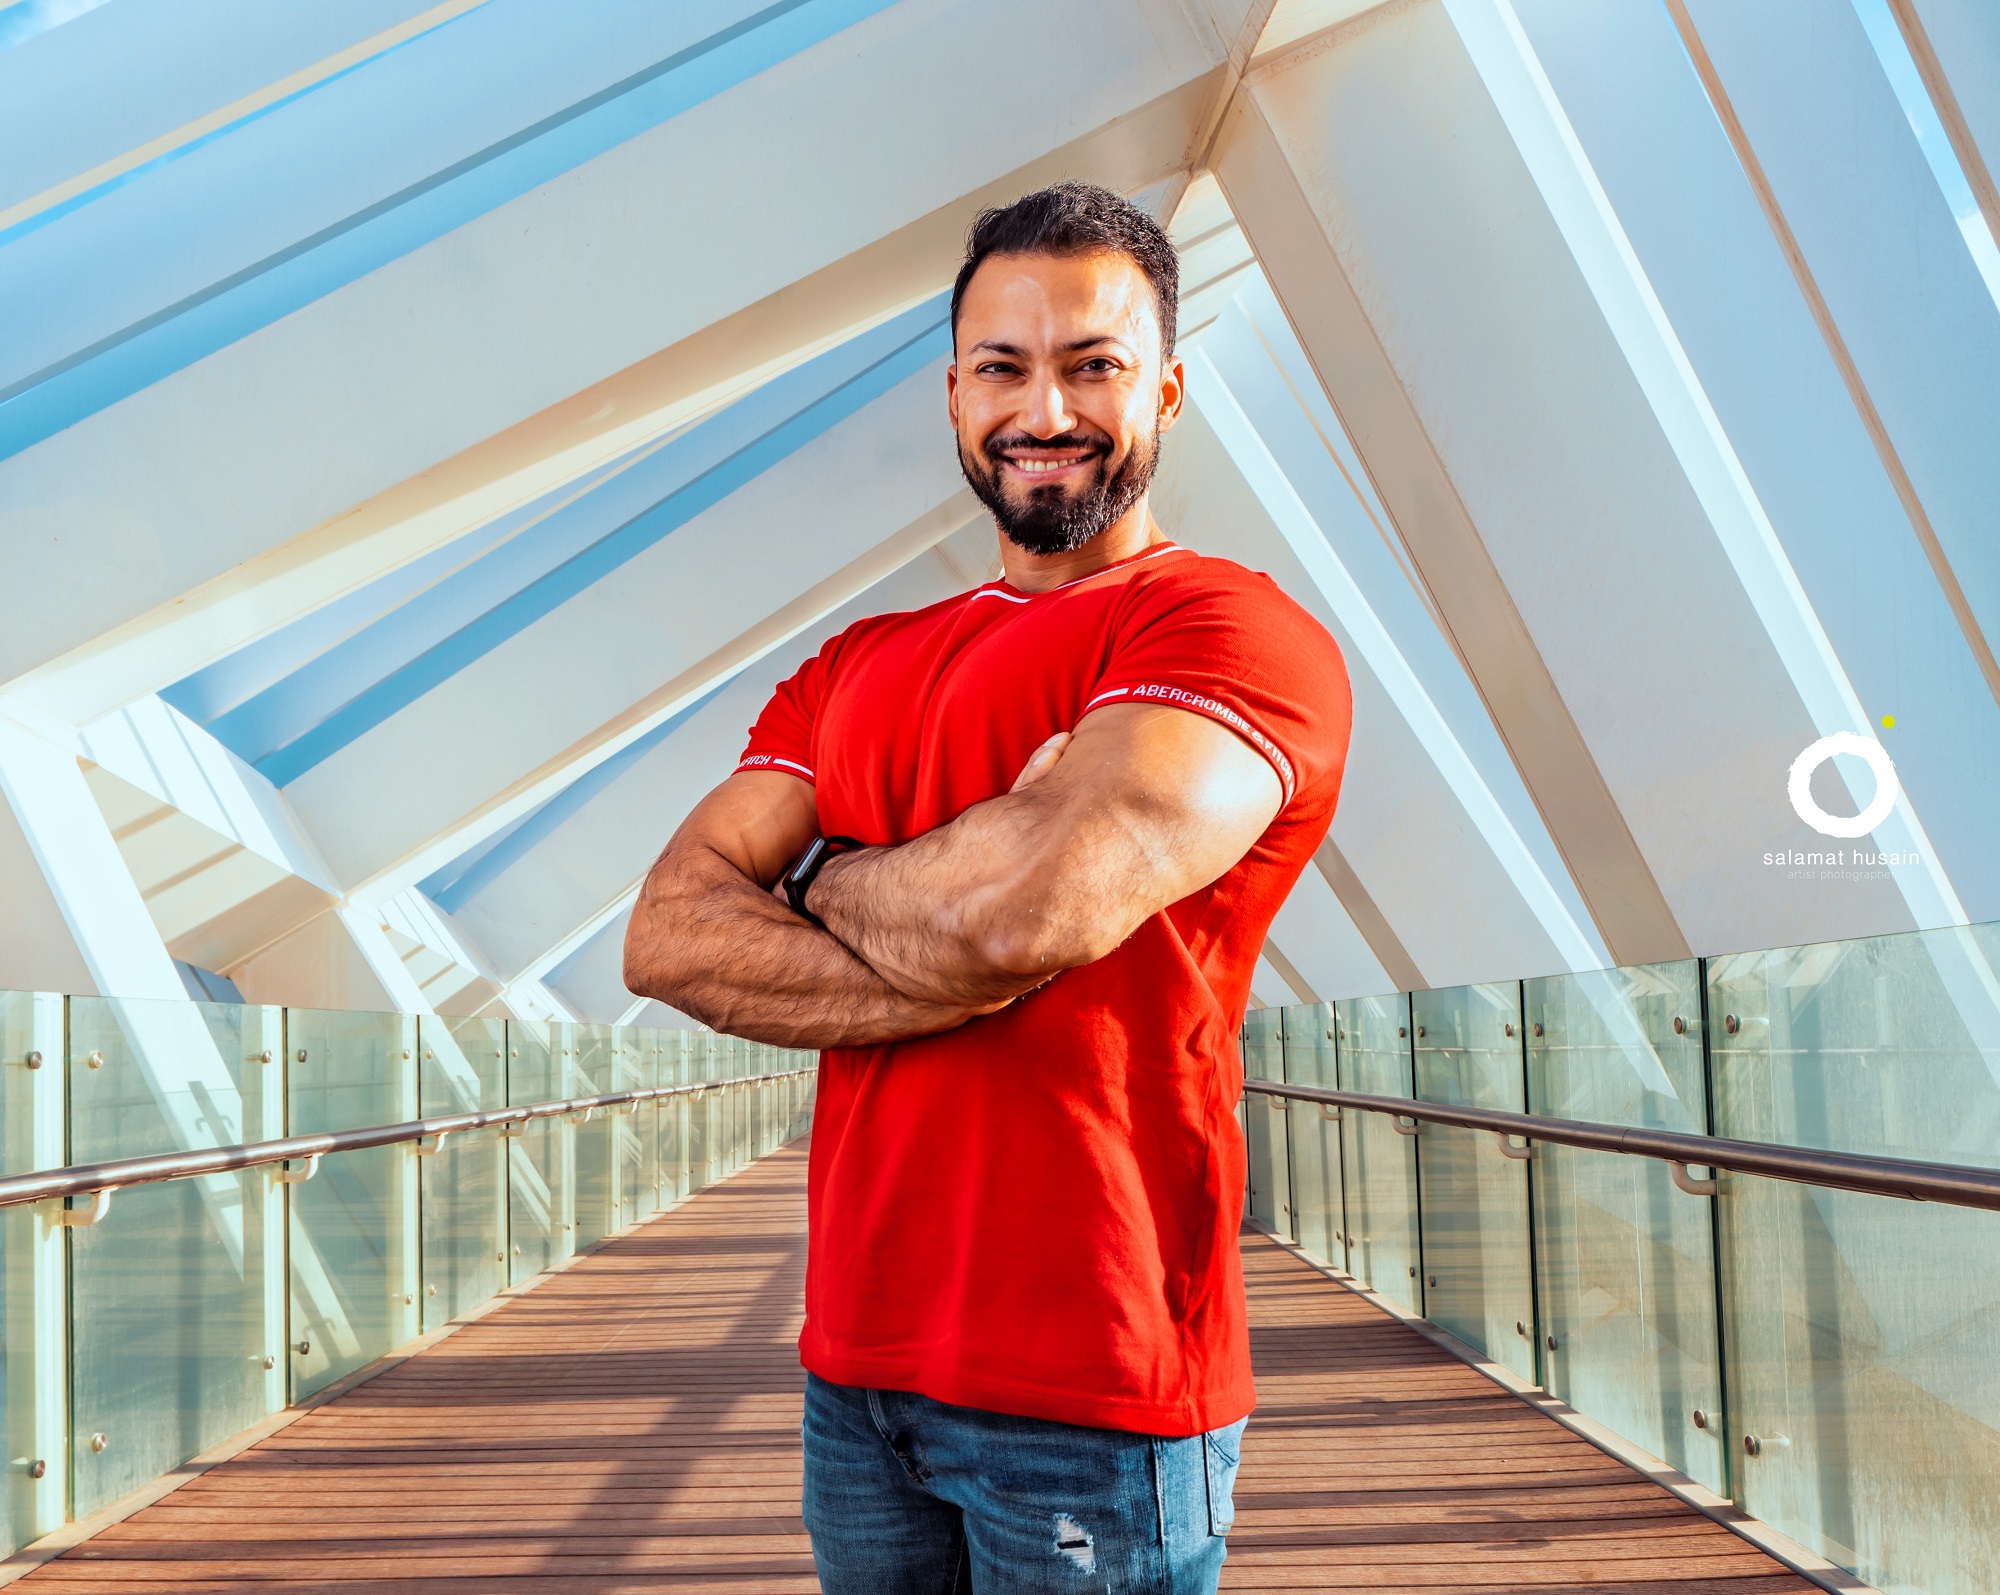 Yasir Khan, a body transformation expert and celebrity trainer